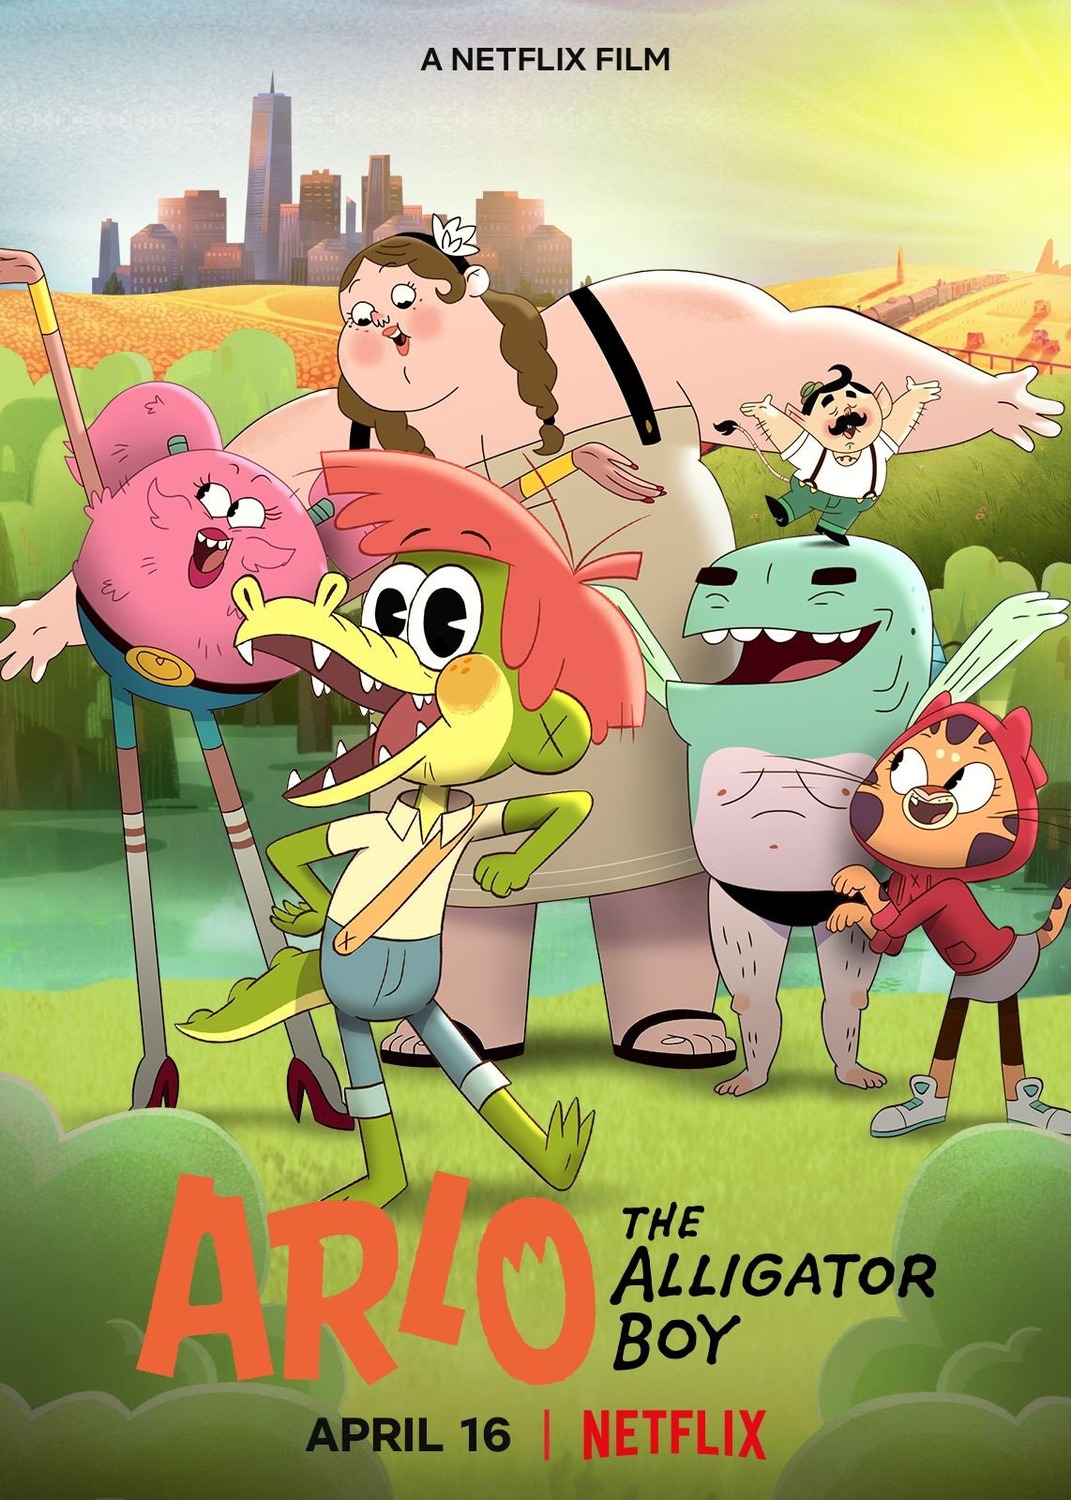 Extra Large TV Poster Image for Arlo the Alligator Boy 